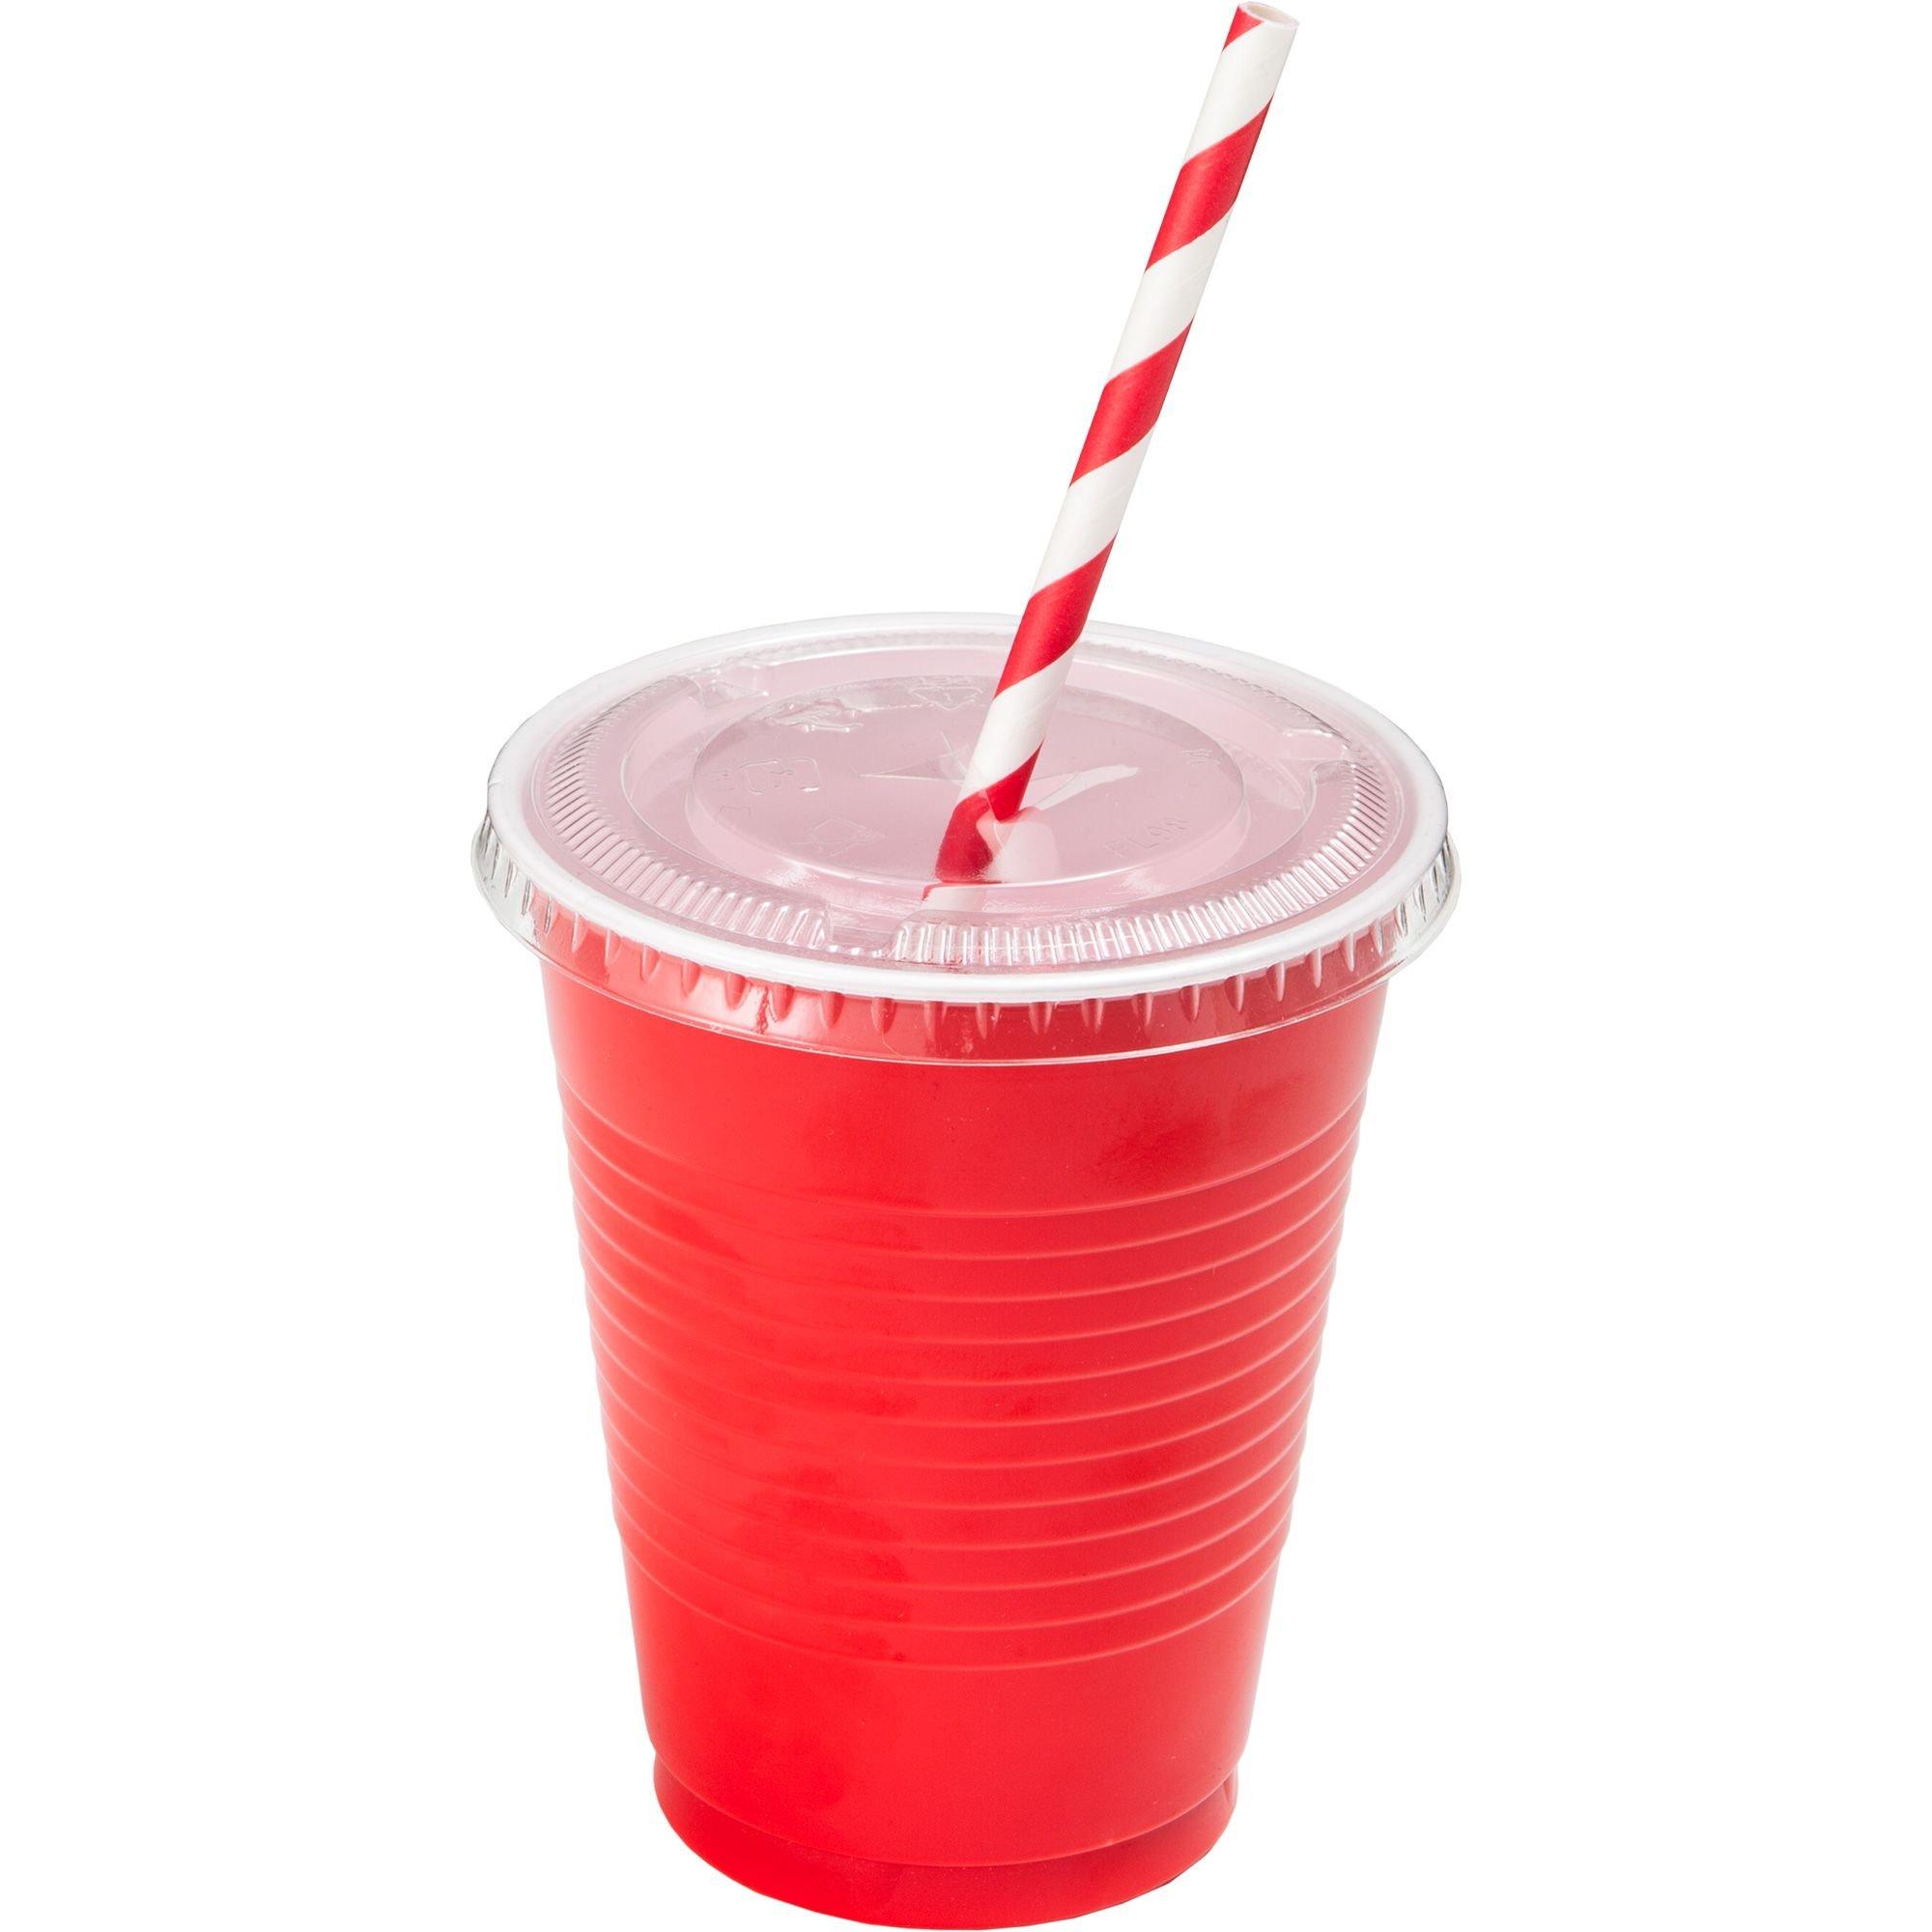 Disposable Plastic Cups, Red Colored Plastic Cups, 12-Ounce Plastic Party  Cups, Strong and Sturdy Disposable Cups for Party, Wedding, Christmas